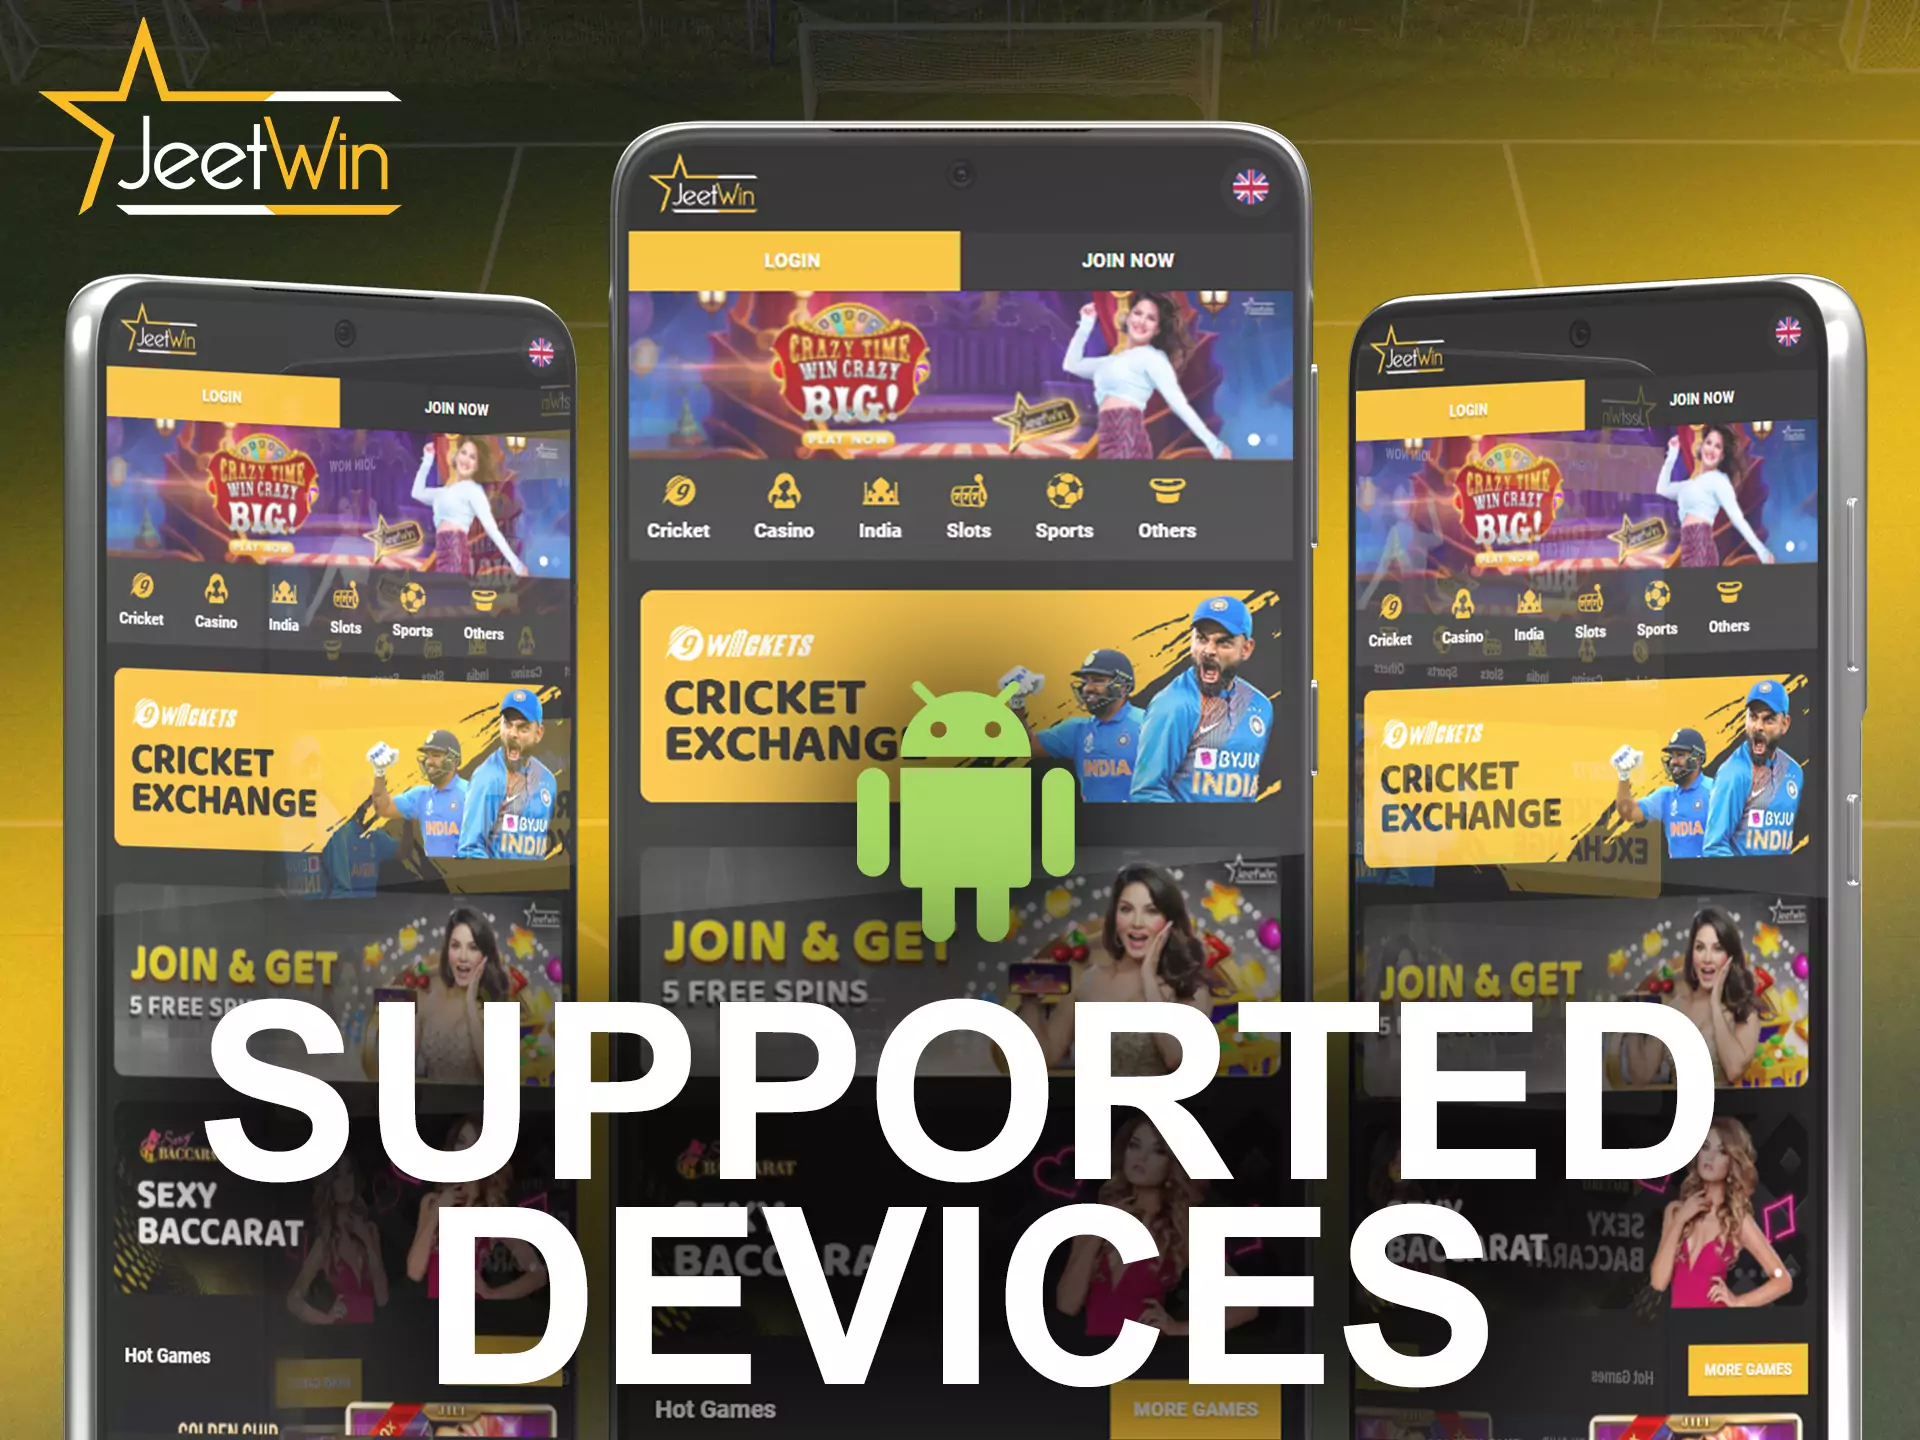 Look for your device in the list of supported devices on JeetWin.